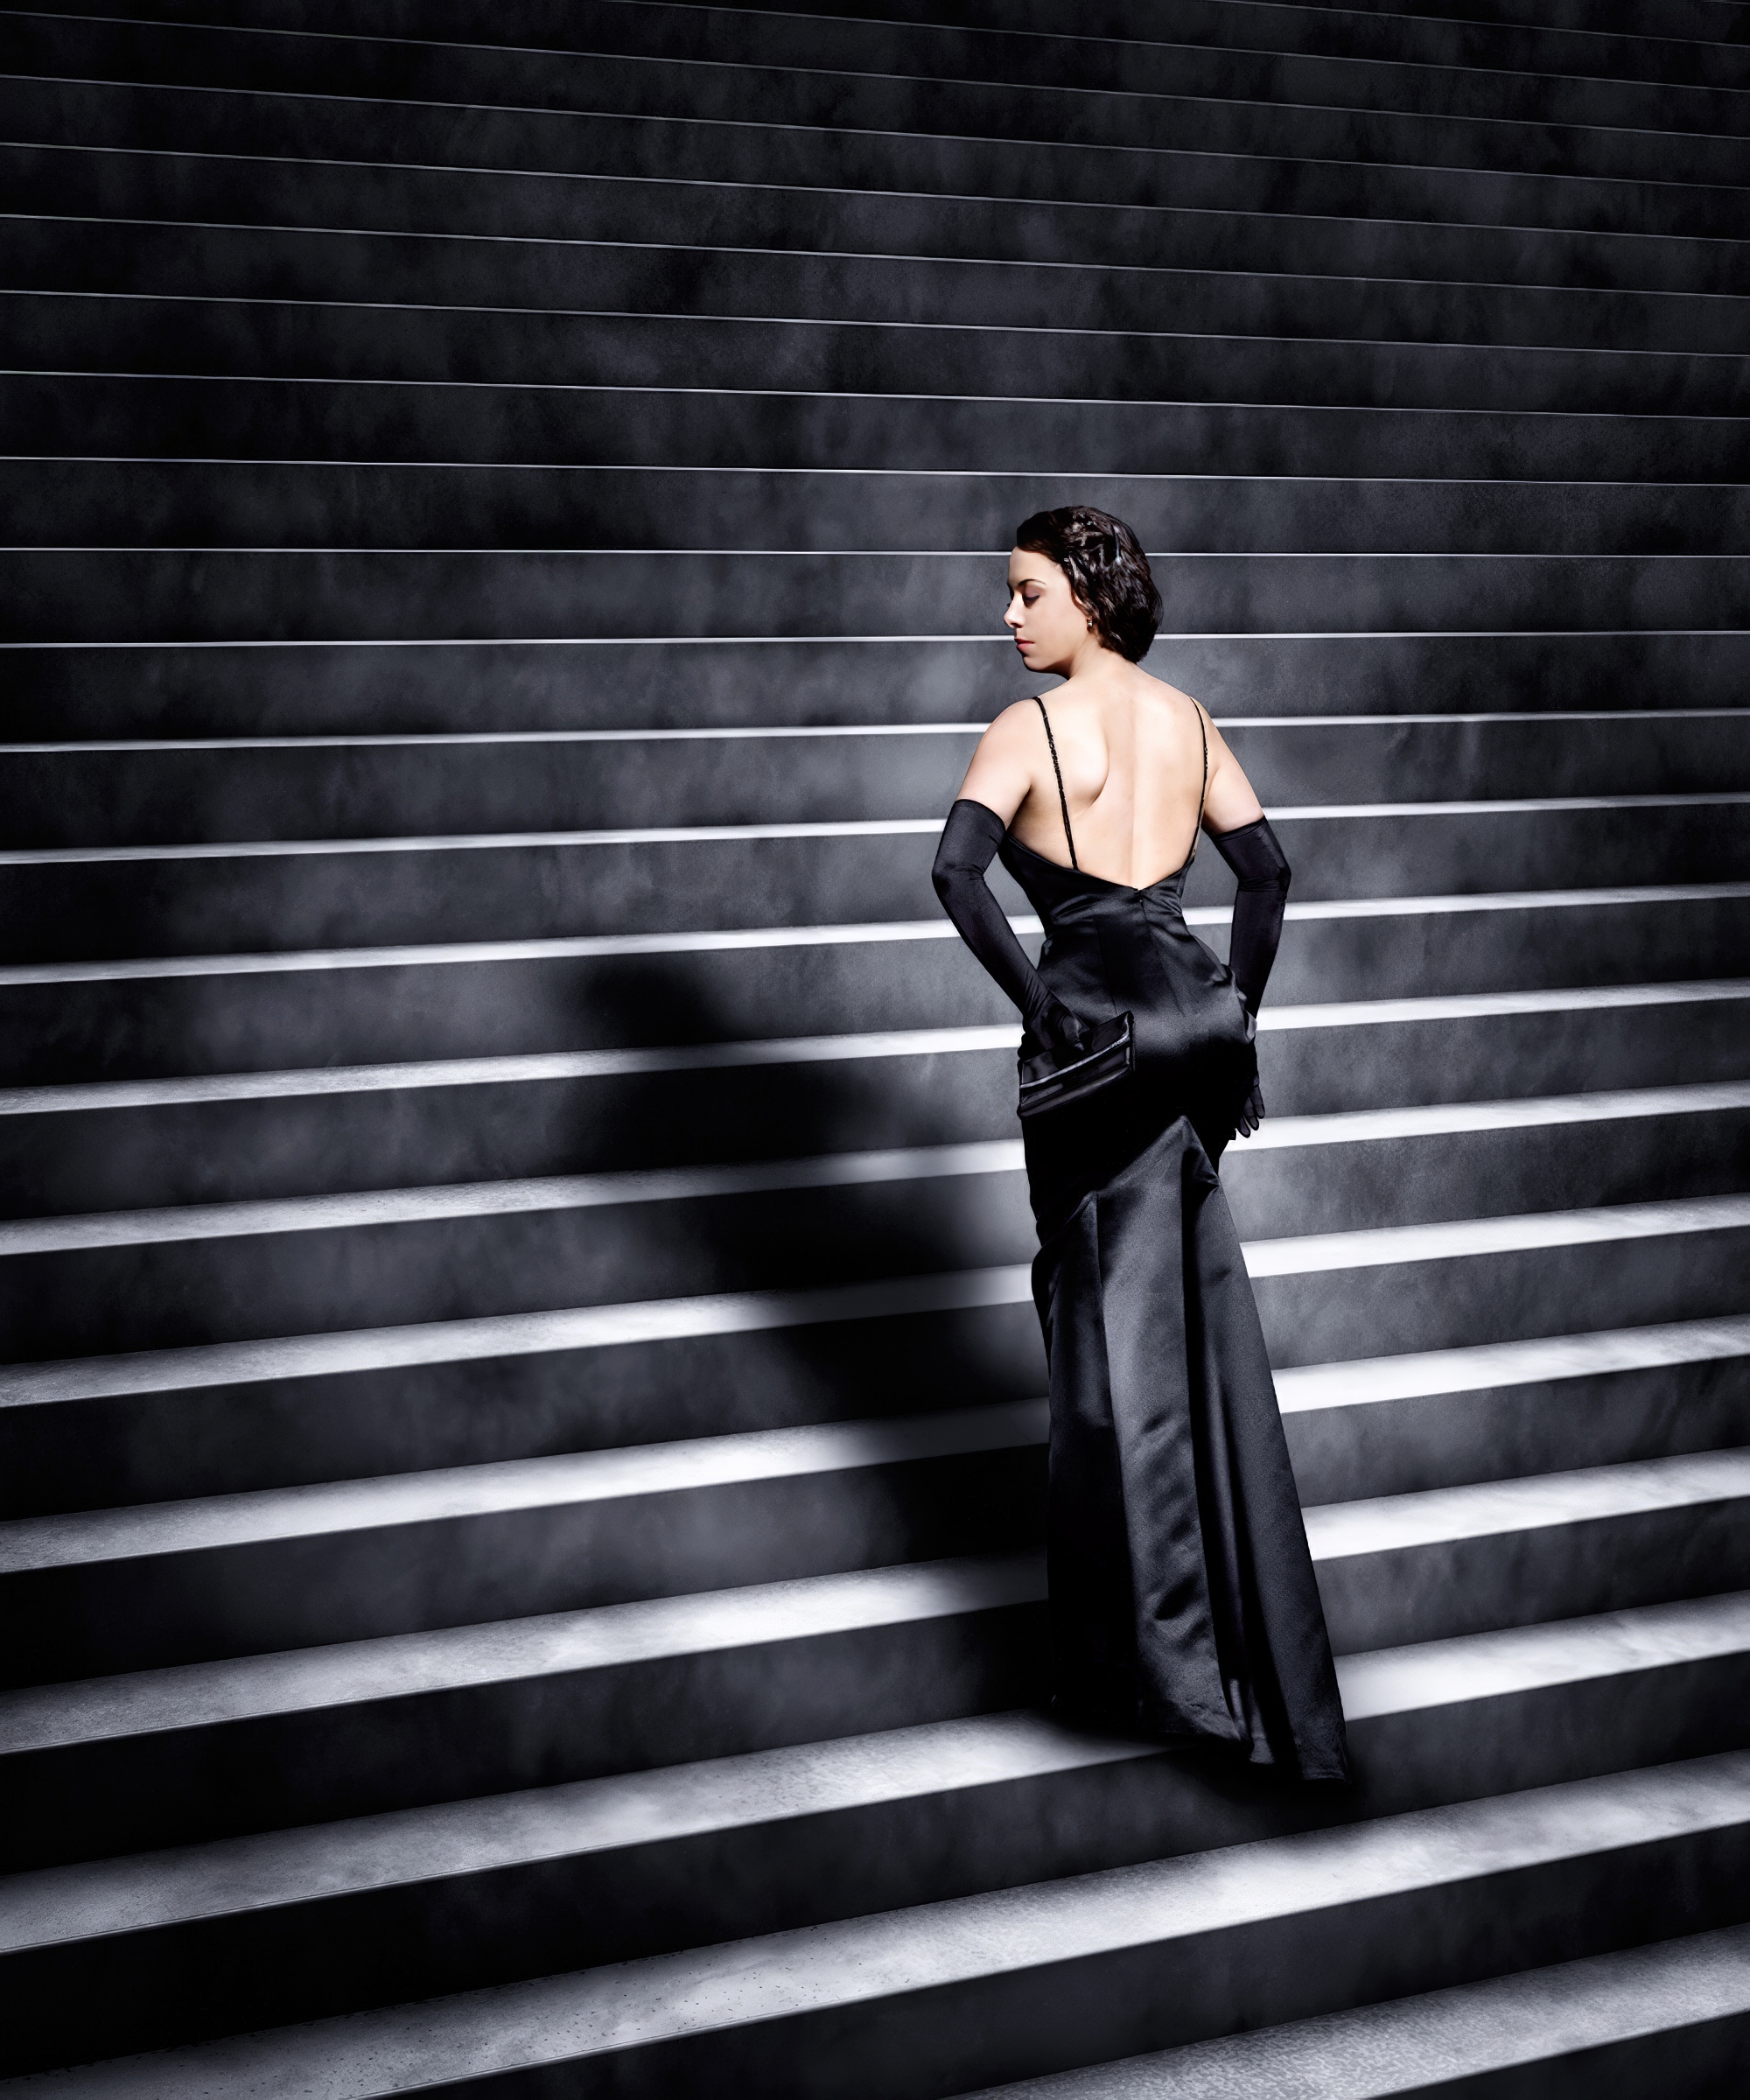 A woman in an elegant dress standing on a wide staircase with many steps. The individual is wearing an elegant, backless black dress. The staircase has sharp lines and shadows that create a pattern across the image. The photo is taken in black and white or has low color saturation, which gives it a dramatic and artistic expression.